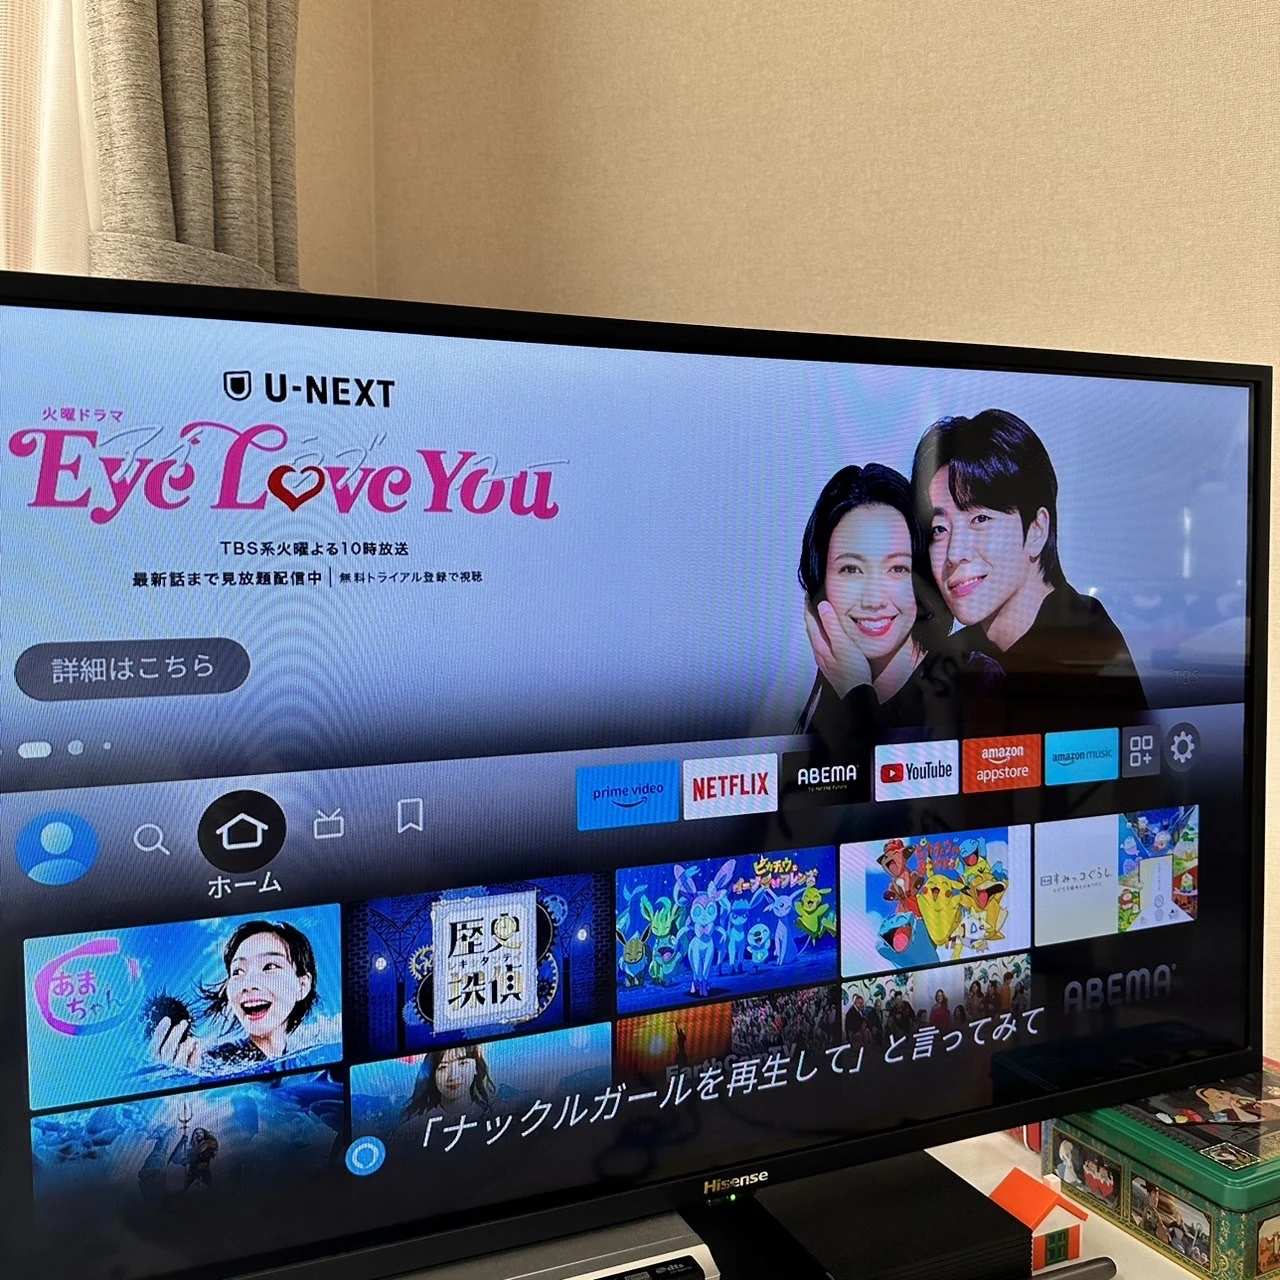 Fire TV Stick第3世代を使ったテレビ画面